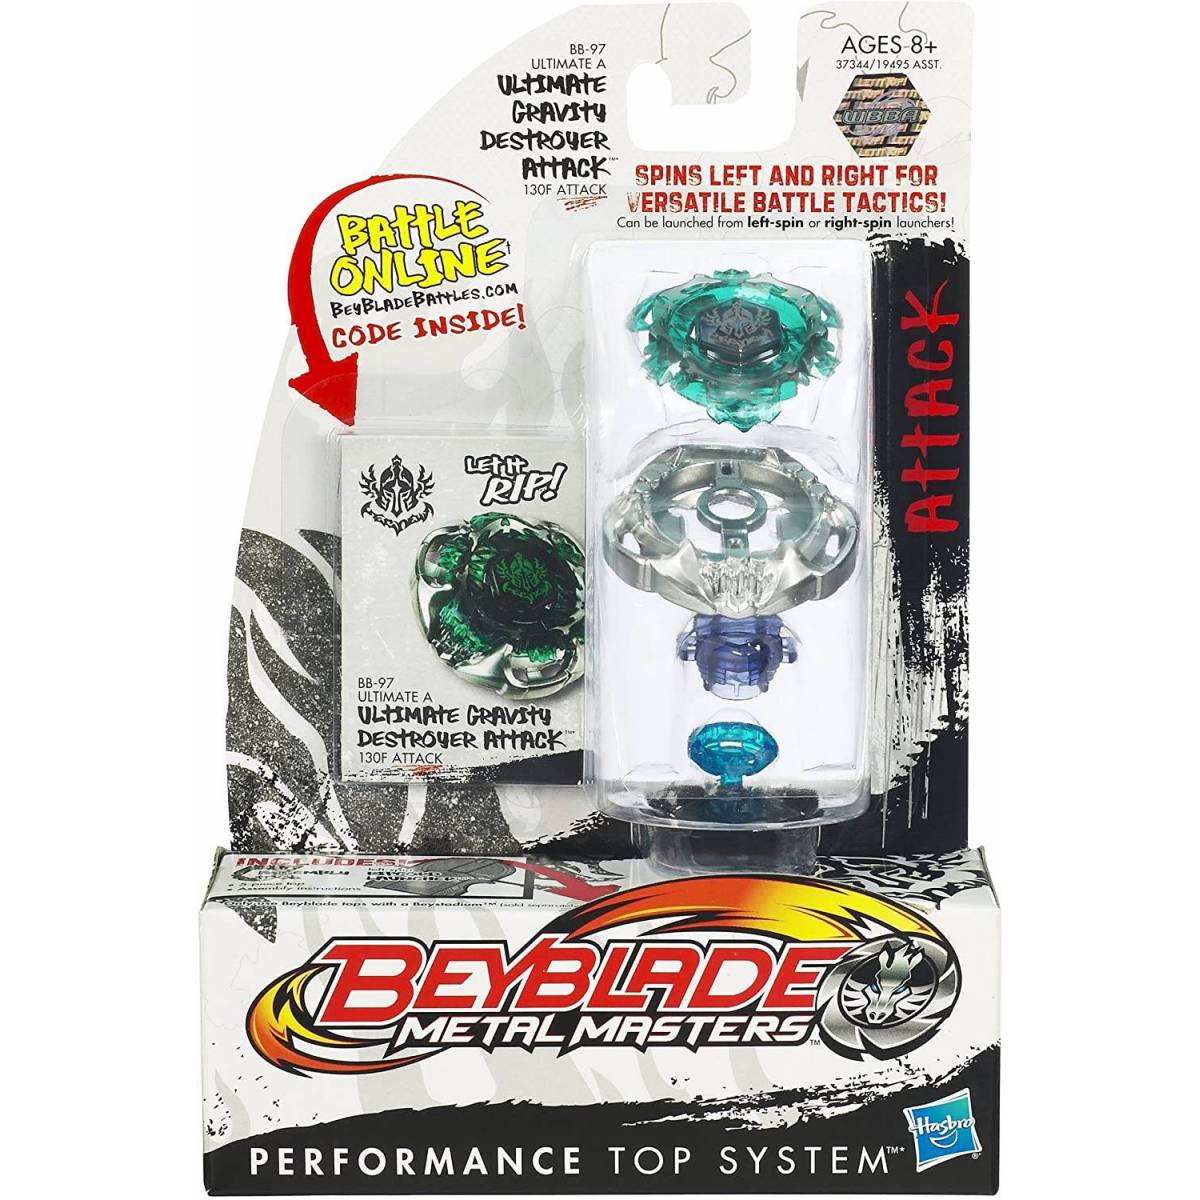 Beyblade Metal Masters Ultimate Gravity Destroyer Attack BB-97 Spinning Top